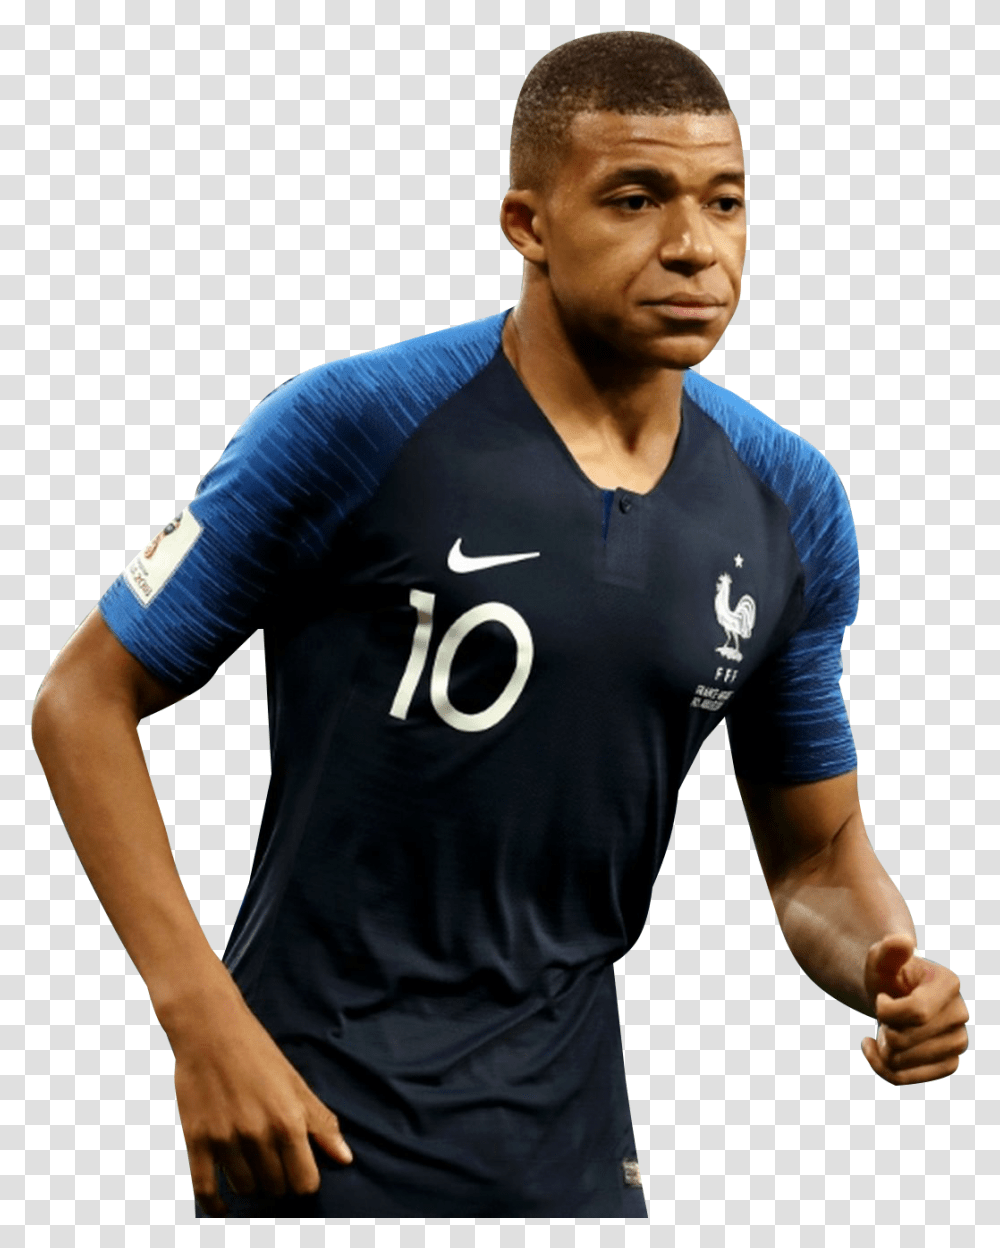 Kylian Mbappe Fifa World Cup Russia 2018 Kylian Mbapp, Clothing, Sleeve, Person, Shirt Transparent Png